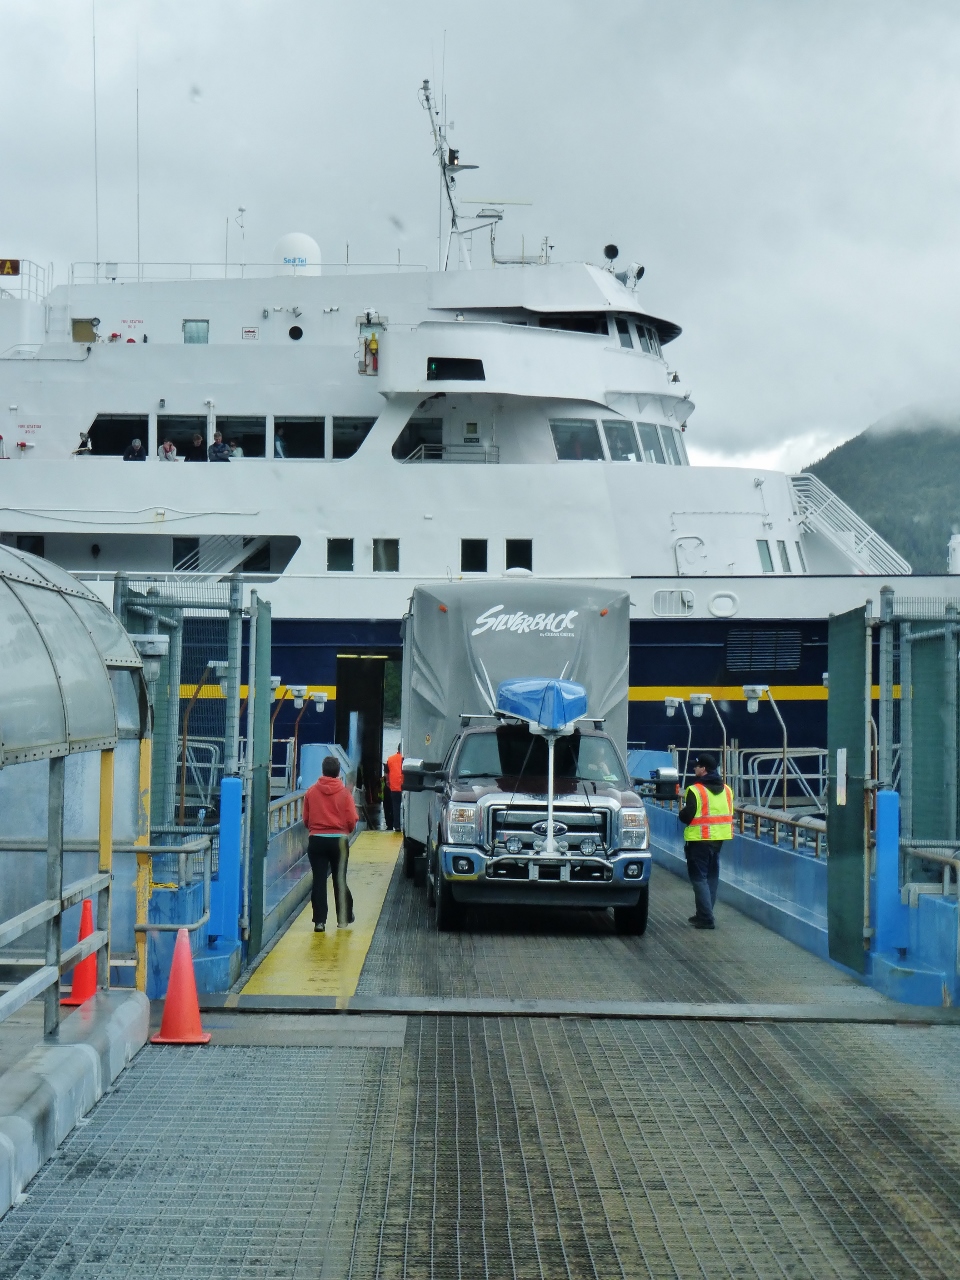 Getting on the ferry can be nerve-wracking because the causeway is narrow and they pack you in inches from each other and from the walls.  This is a friend of ours we met in Ketchikan who is backing his fifth wheel  onto the deck, and doing it expertly.